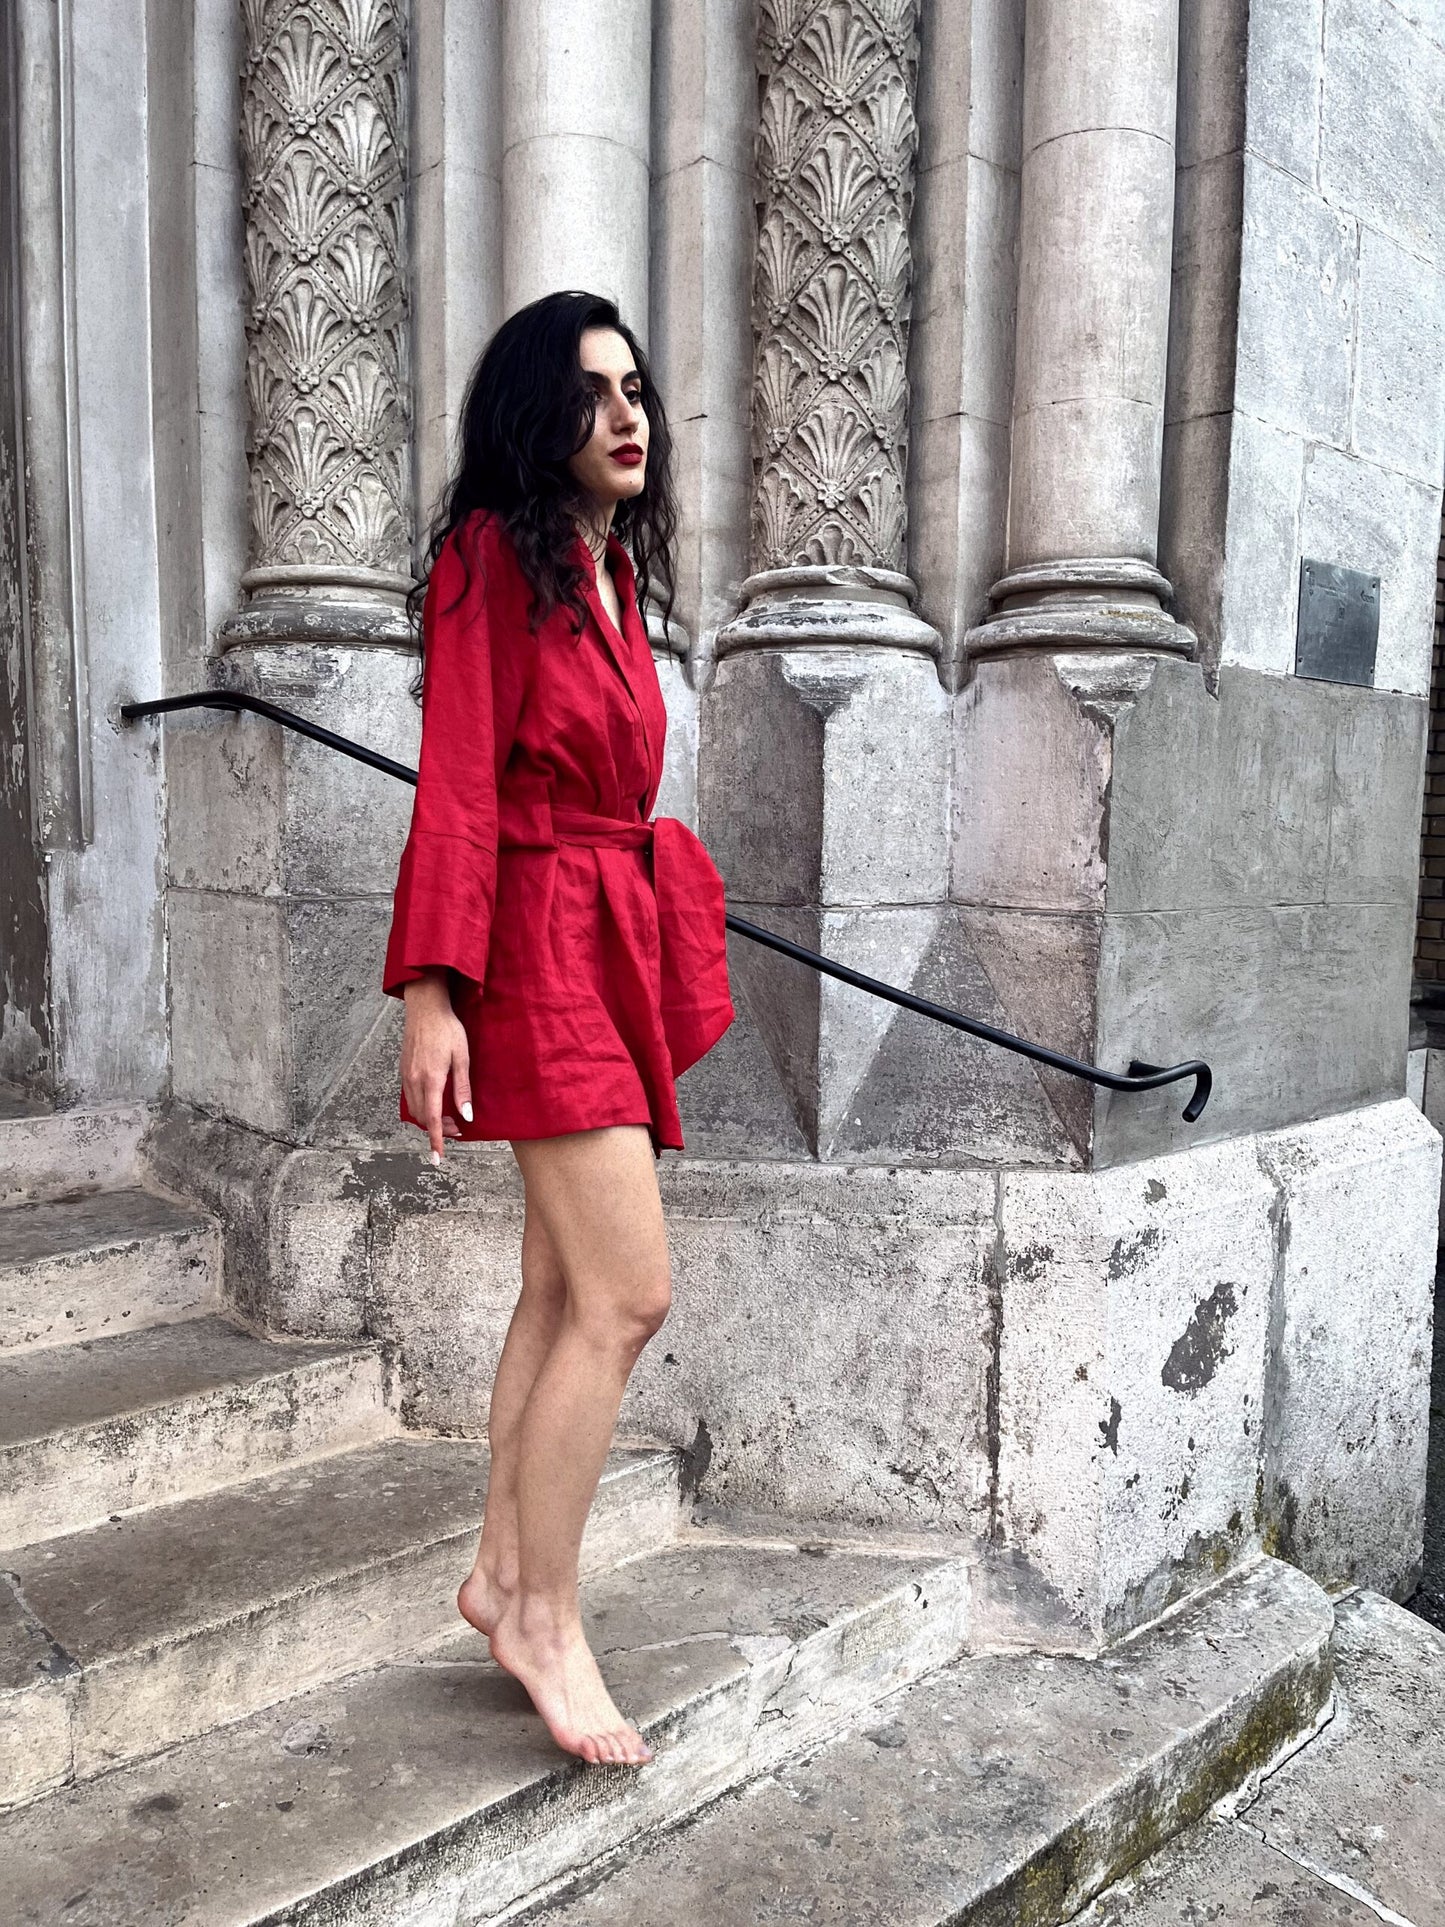 Sophisticated powerful woman walks down the steps of a glamorous old building while wearing a vibrant chery red linen kimono. She is barefoot with her legs seductively showing as she stares ahead into the distance. Her kimono is a bespoke handmade garment designed and manufactured in South Africa.